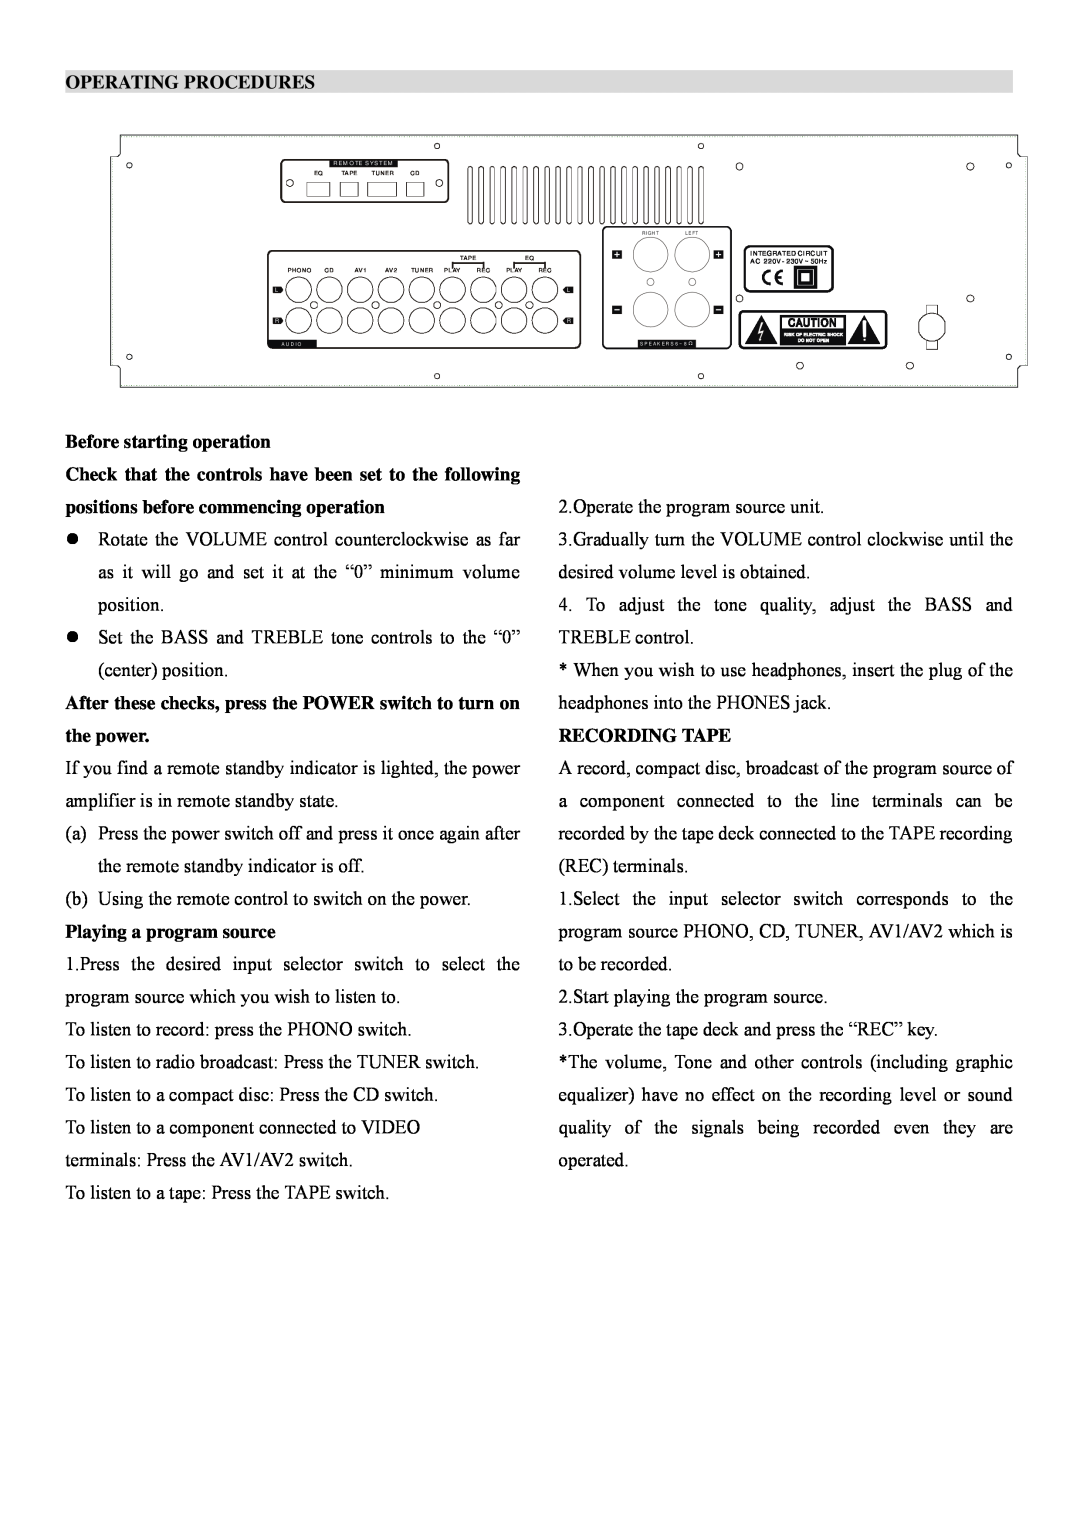 PYLE Audio PT-600A manual Operating Procedures, Before starting operation, Playing a program source, Recording Tape 